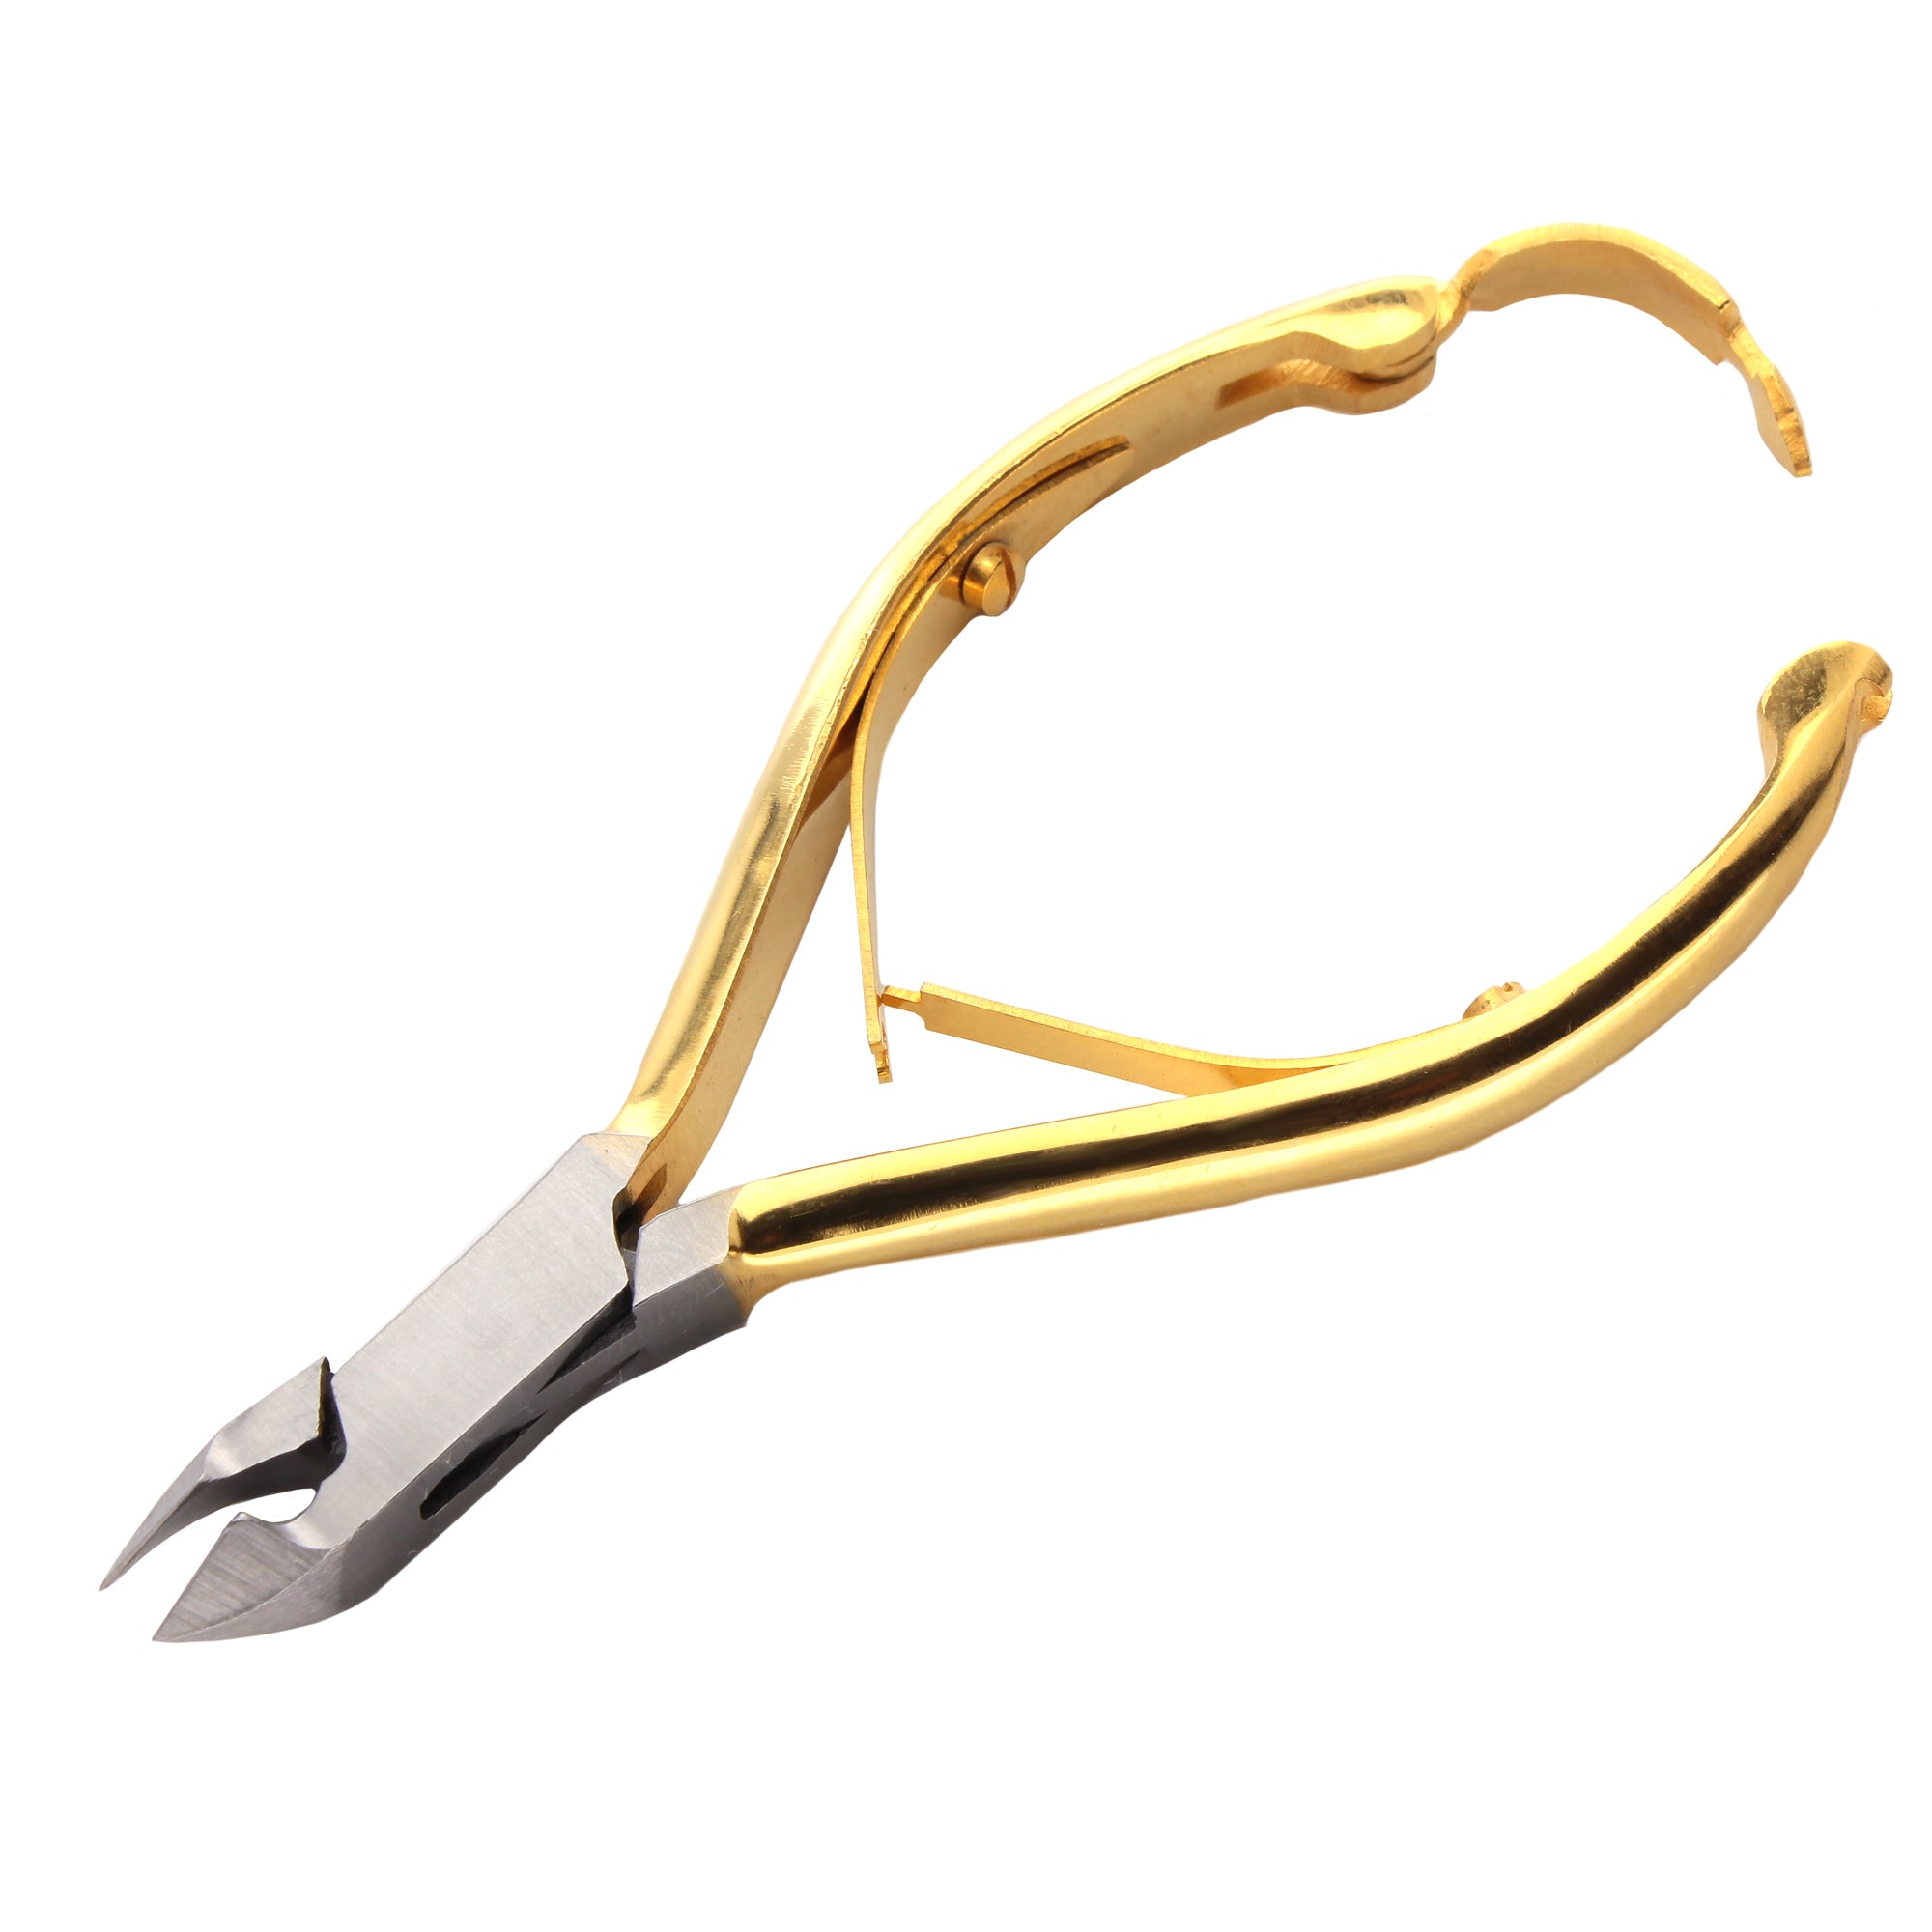 Acrylic Nippers/Cutter Gold Handle